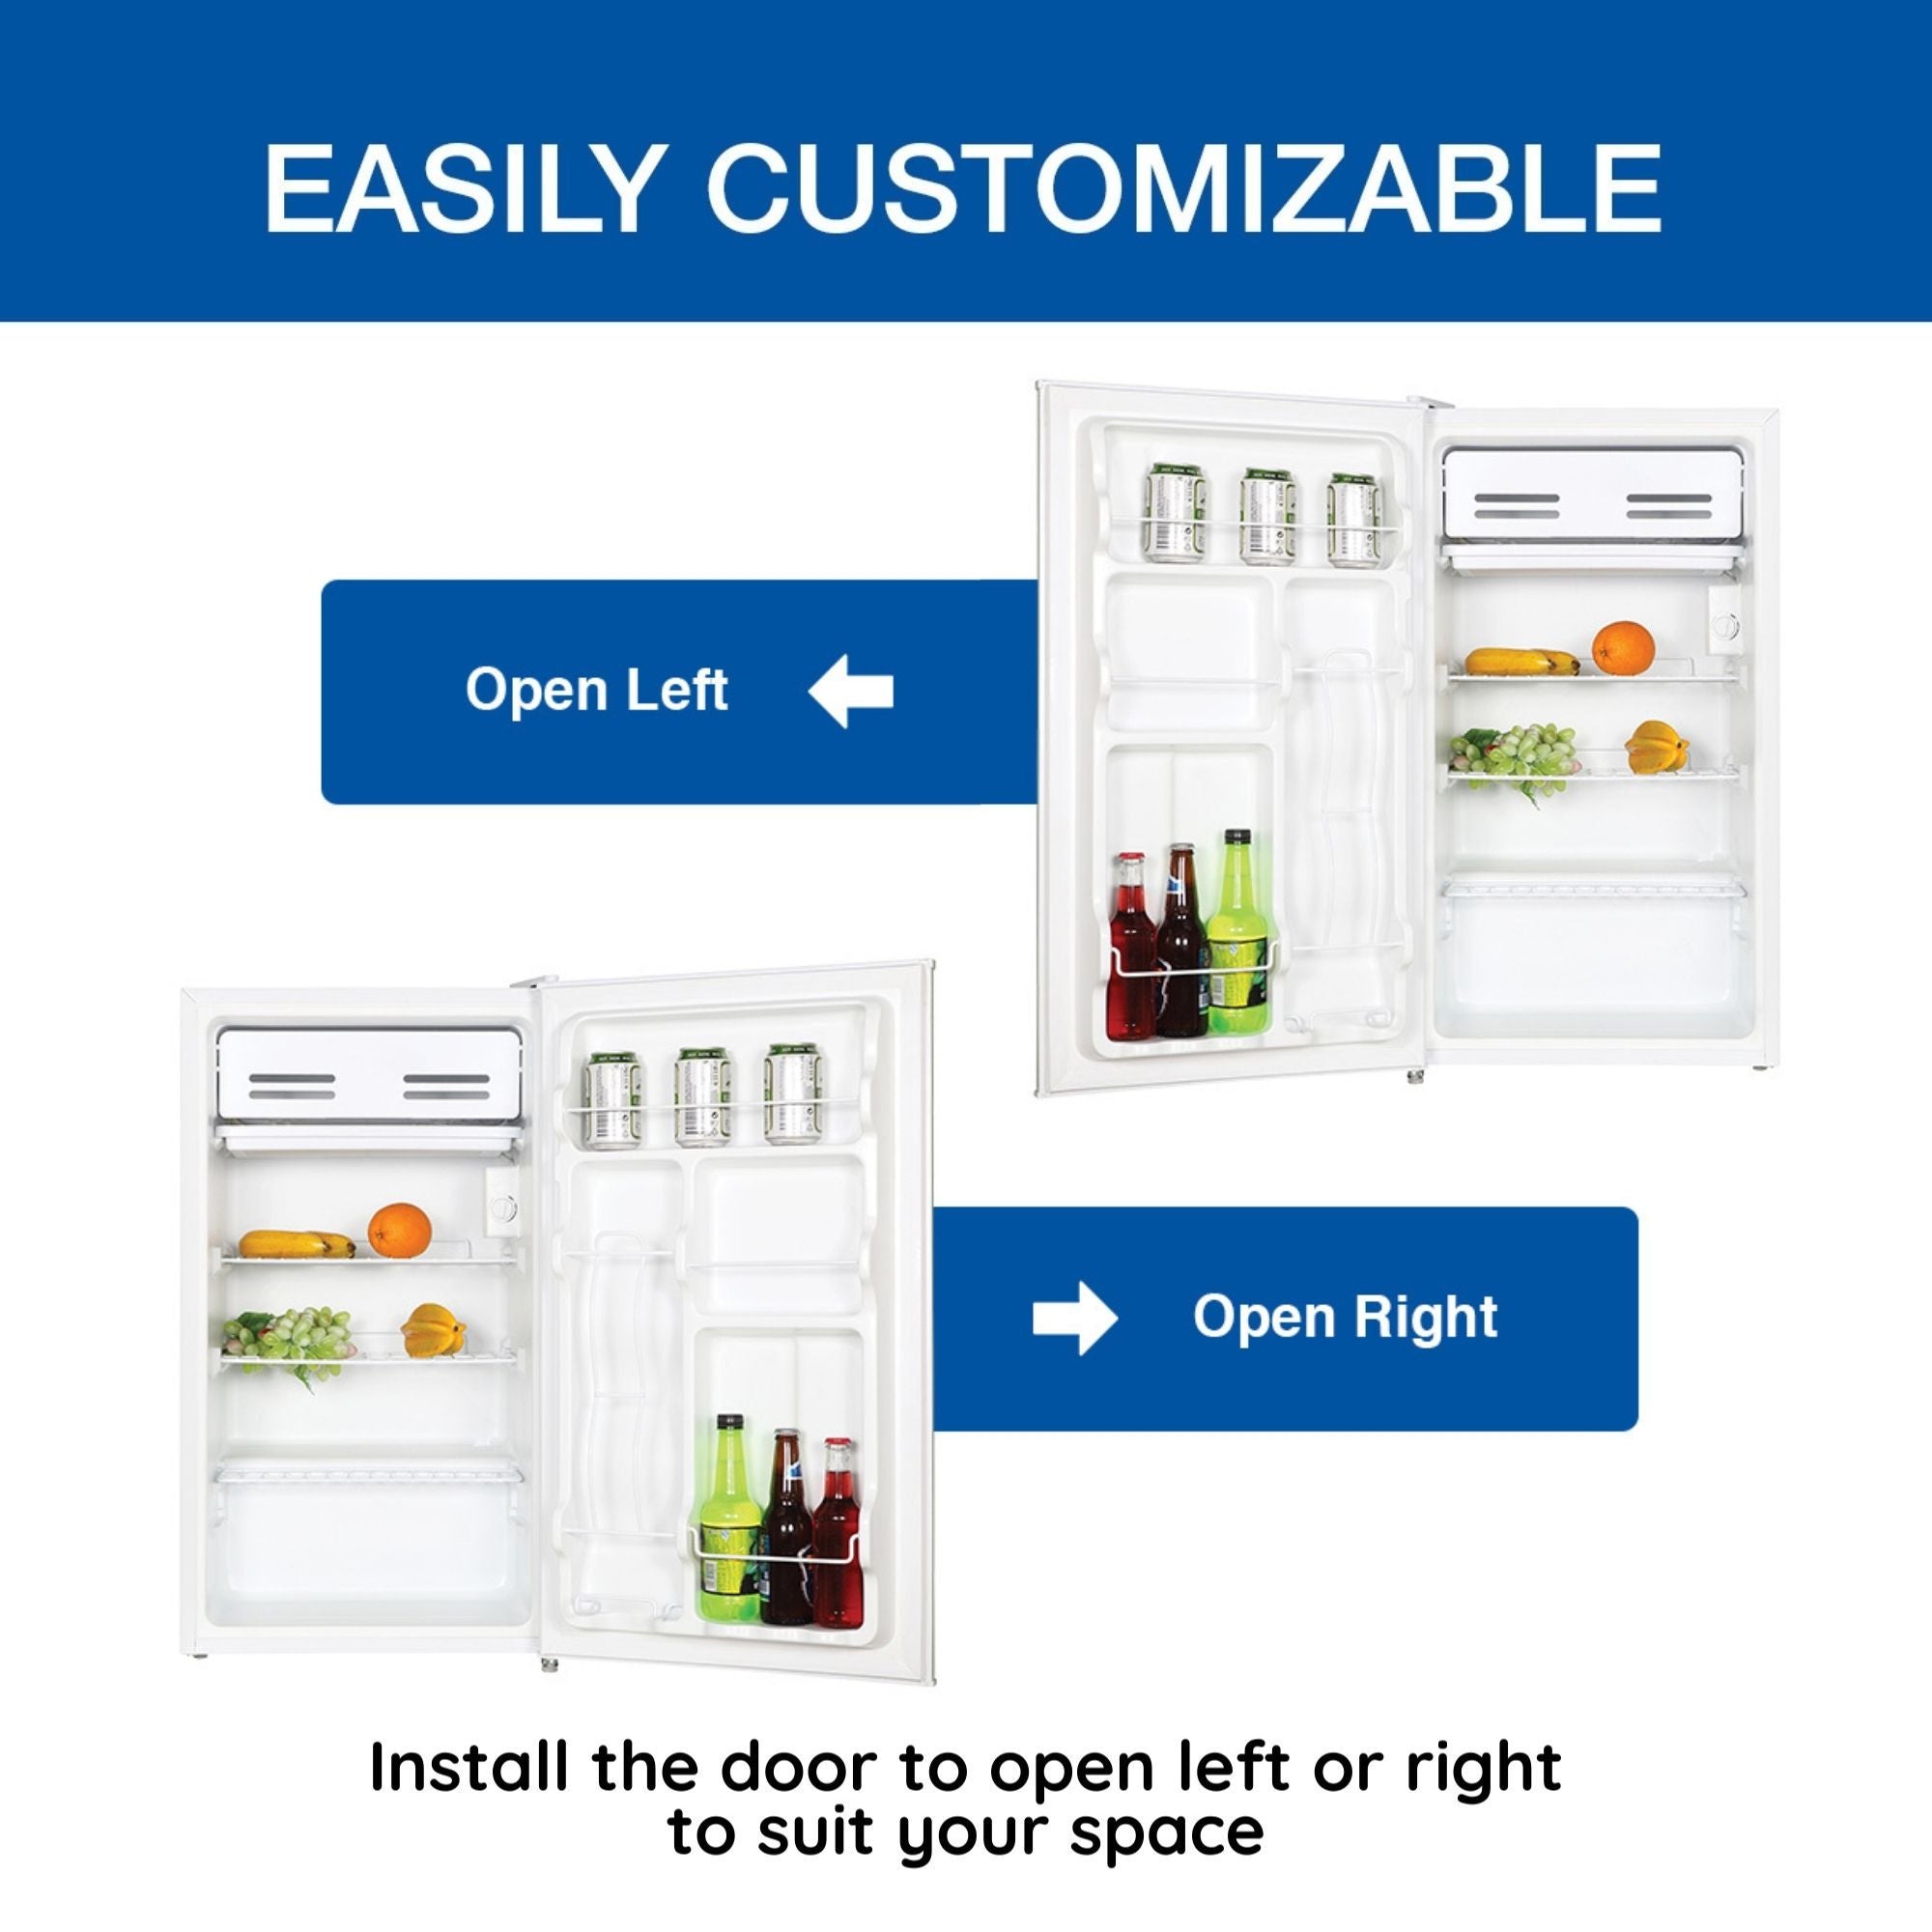 Two product shots showing compact fridge, open with food and beverages inside, with door installed to open left or right. Text above reads, "Easily customizable," and text below reads, "Install the door to open left or right to suit your space"